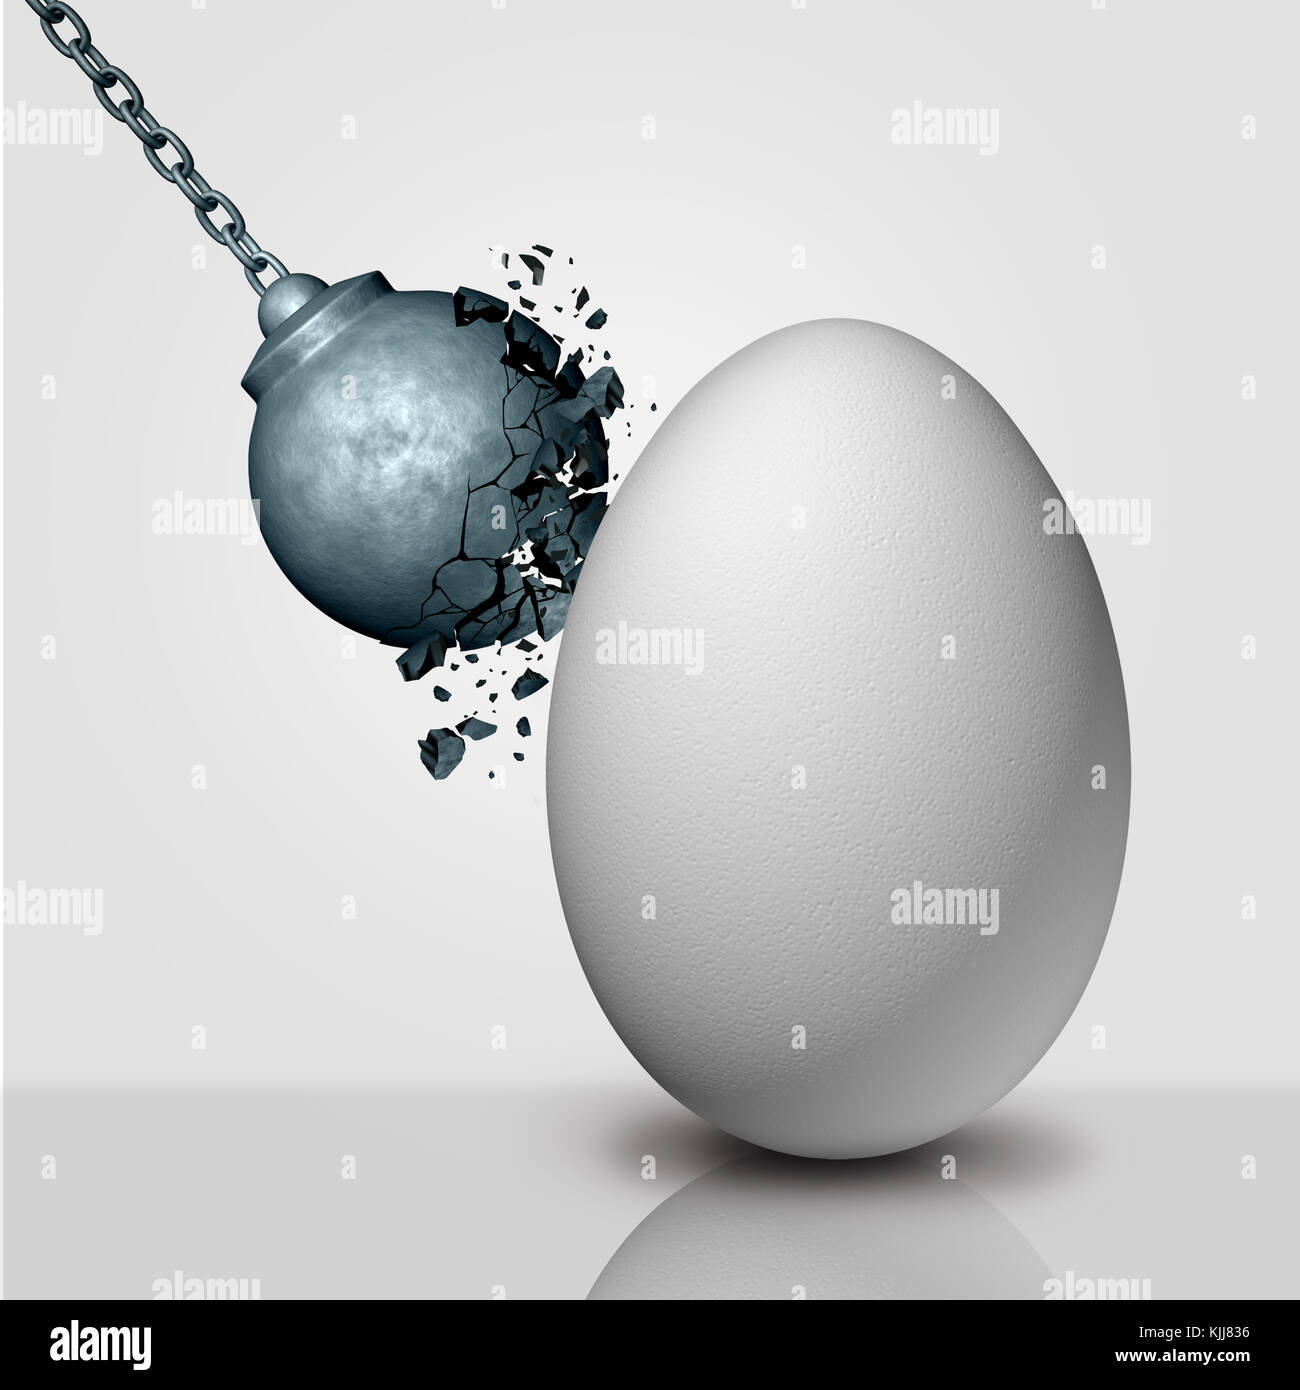 Inner strength concept and stamina or durability metaphor as a wrecking ball being destroyed by an egg as a durability and persistence icon. Stock Photo